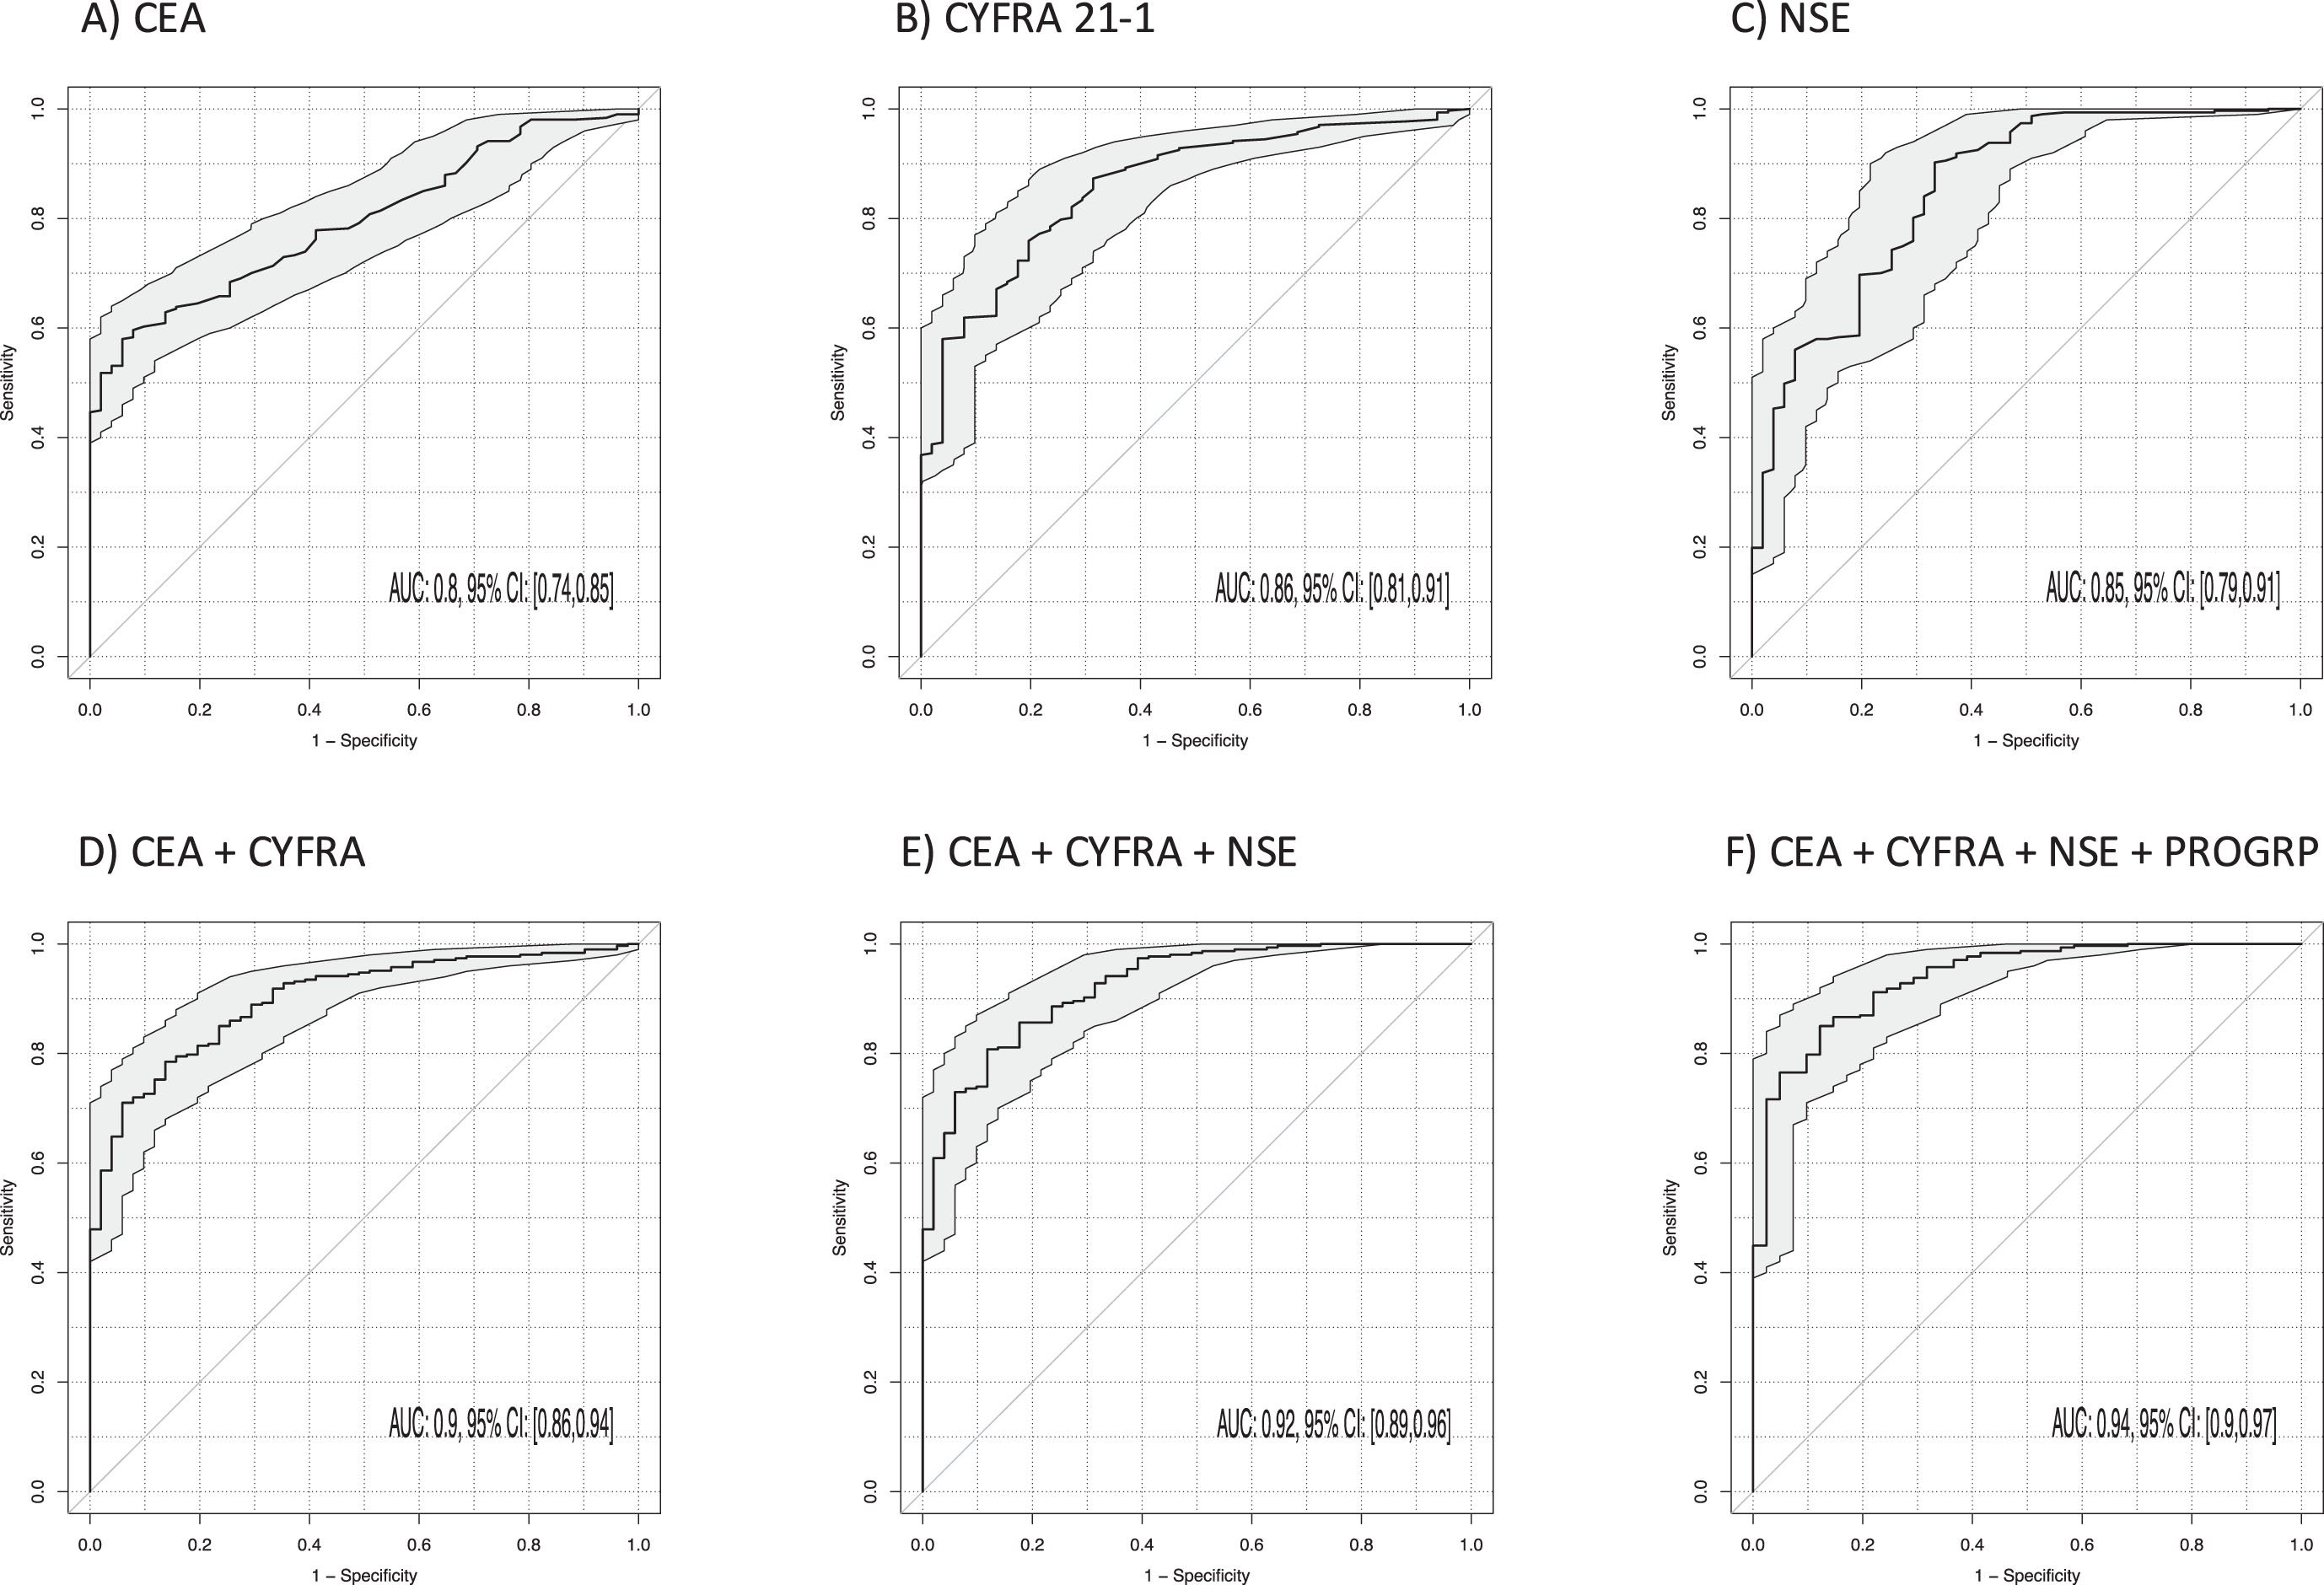 Power of discrimination between patients with non-small cell lung cancer (NSCLC) and benign lung diseases (BLD) by use of single tumor markers and combinations illustrated by receiver operating characteristic (ROC) curves with areas under the curves (AUCs) and respective 95% confidence intervals (95% CI).